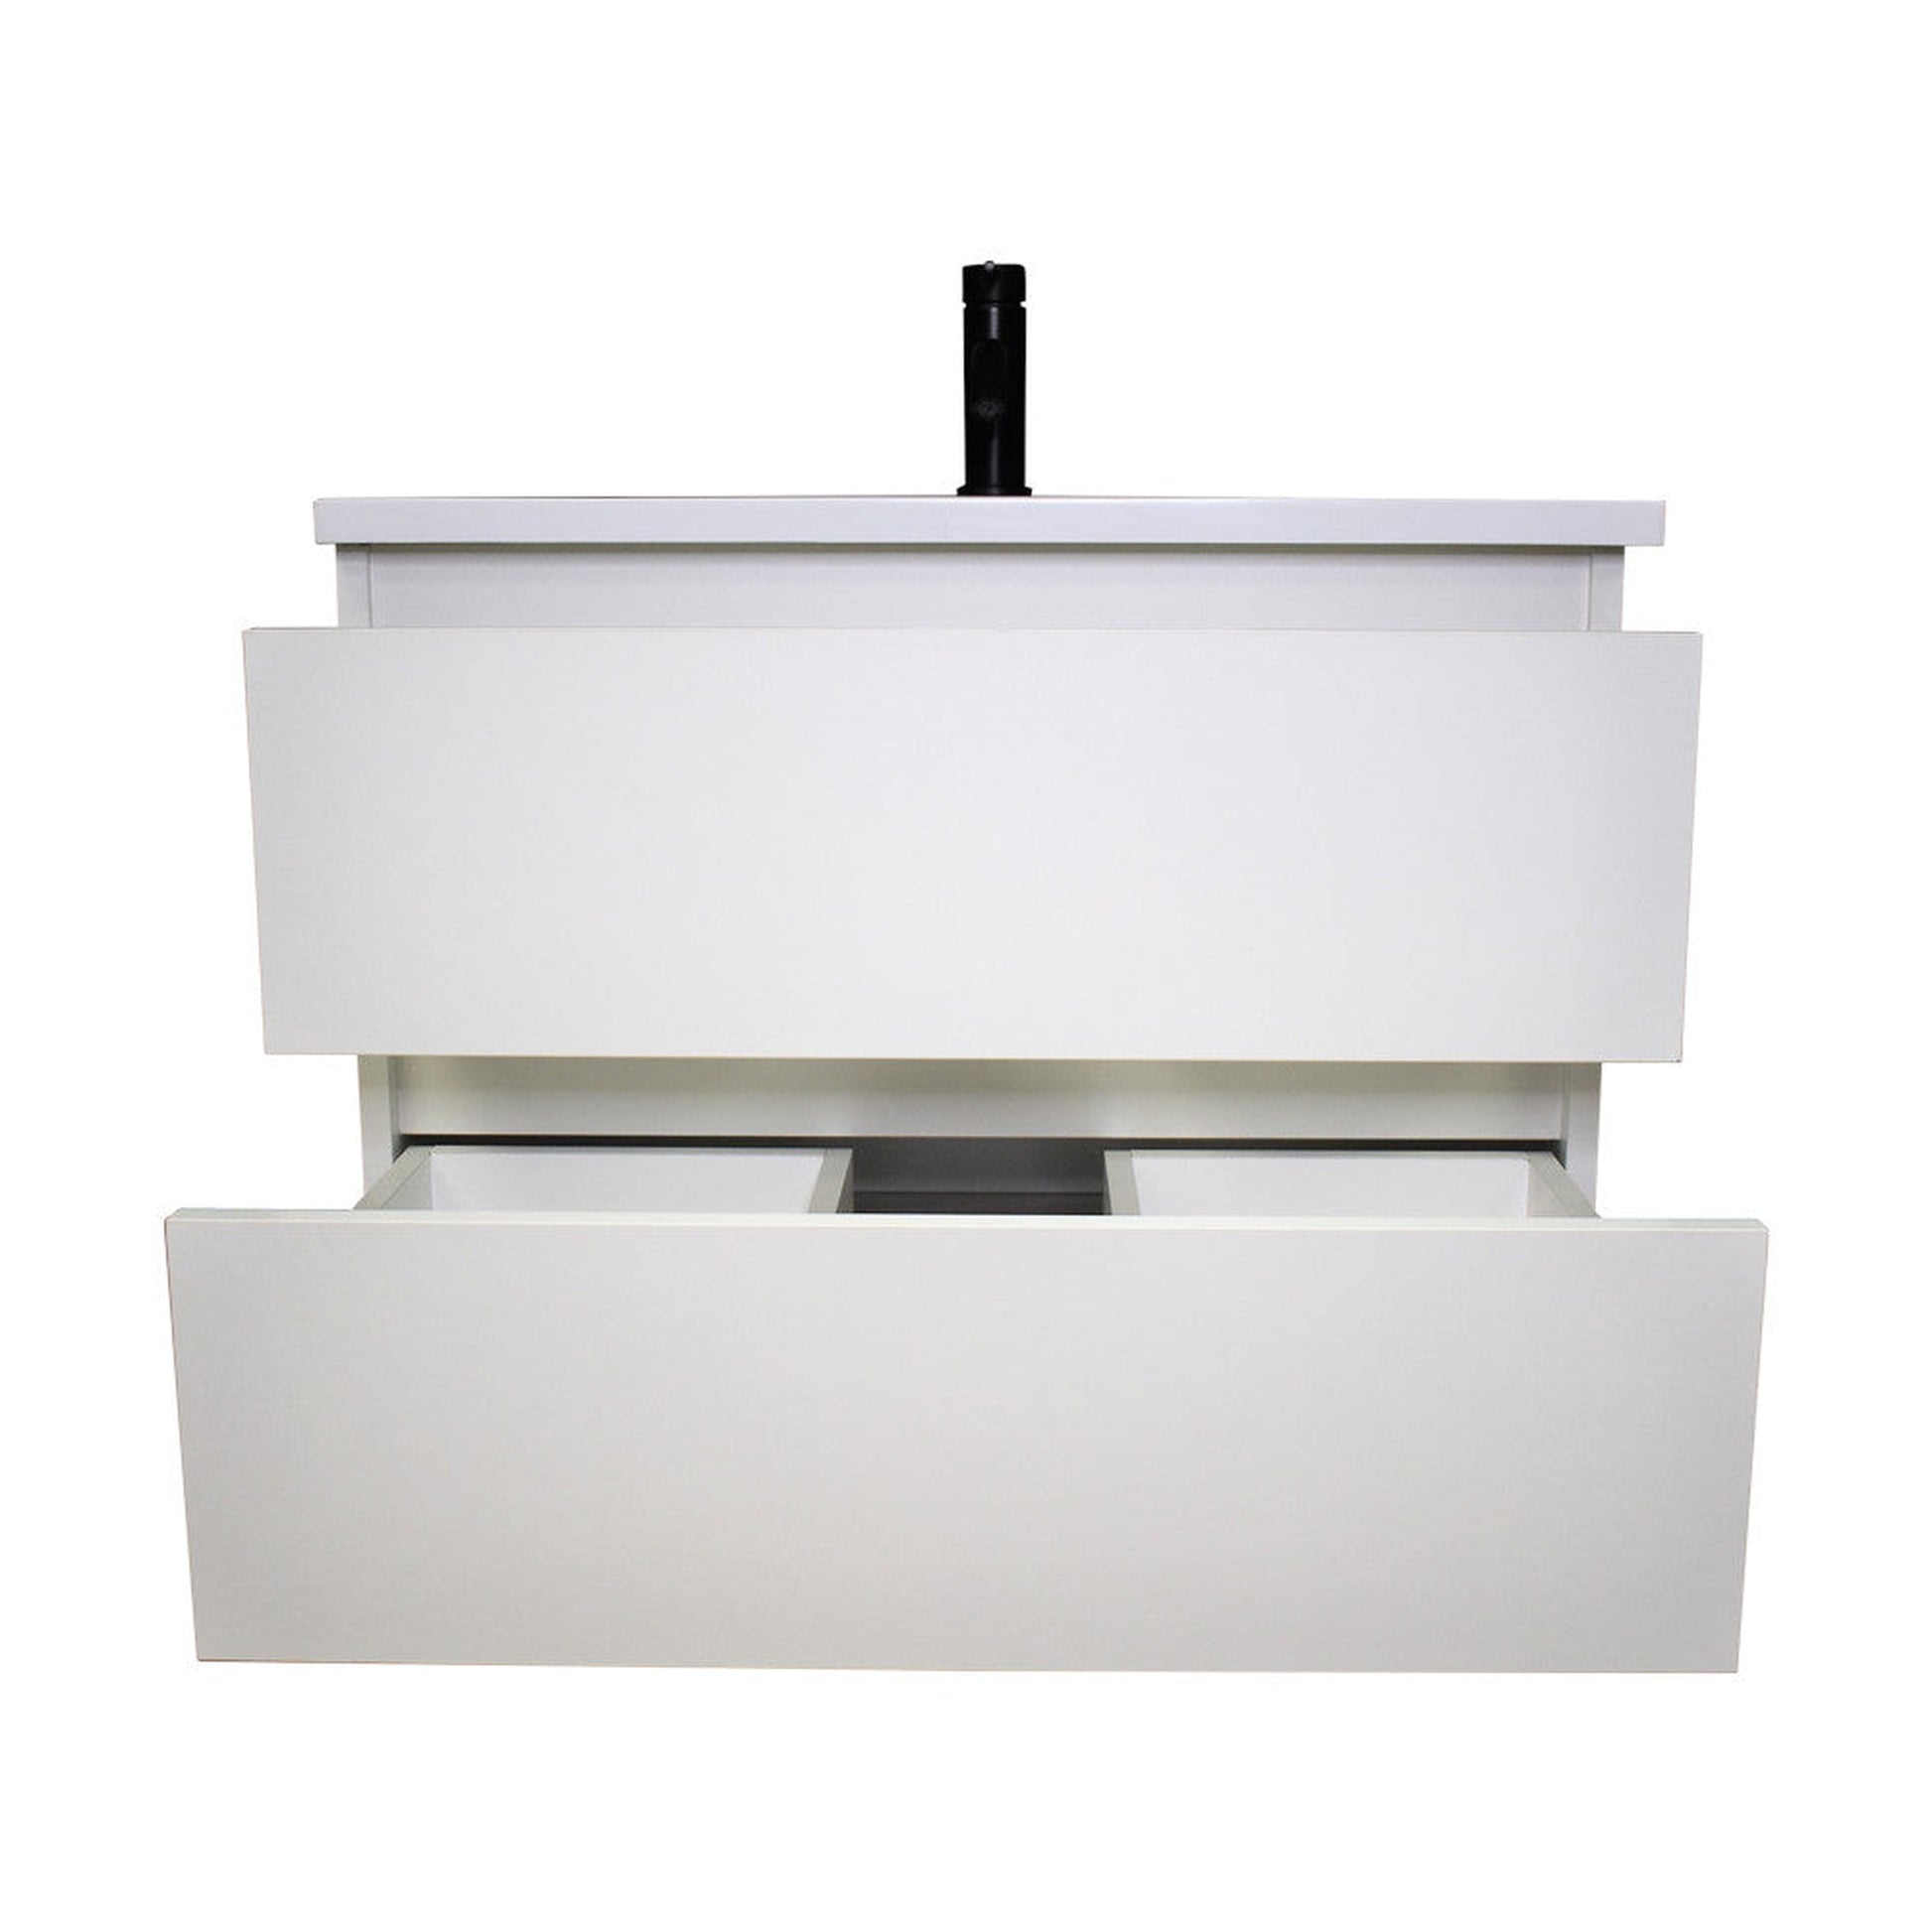 Volpa USA Salt 30" x 20" White Wall-Mounted Floating Bathroom Vanity With Drawers, Acrylic Top and Integrated Acrylic Sink